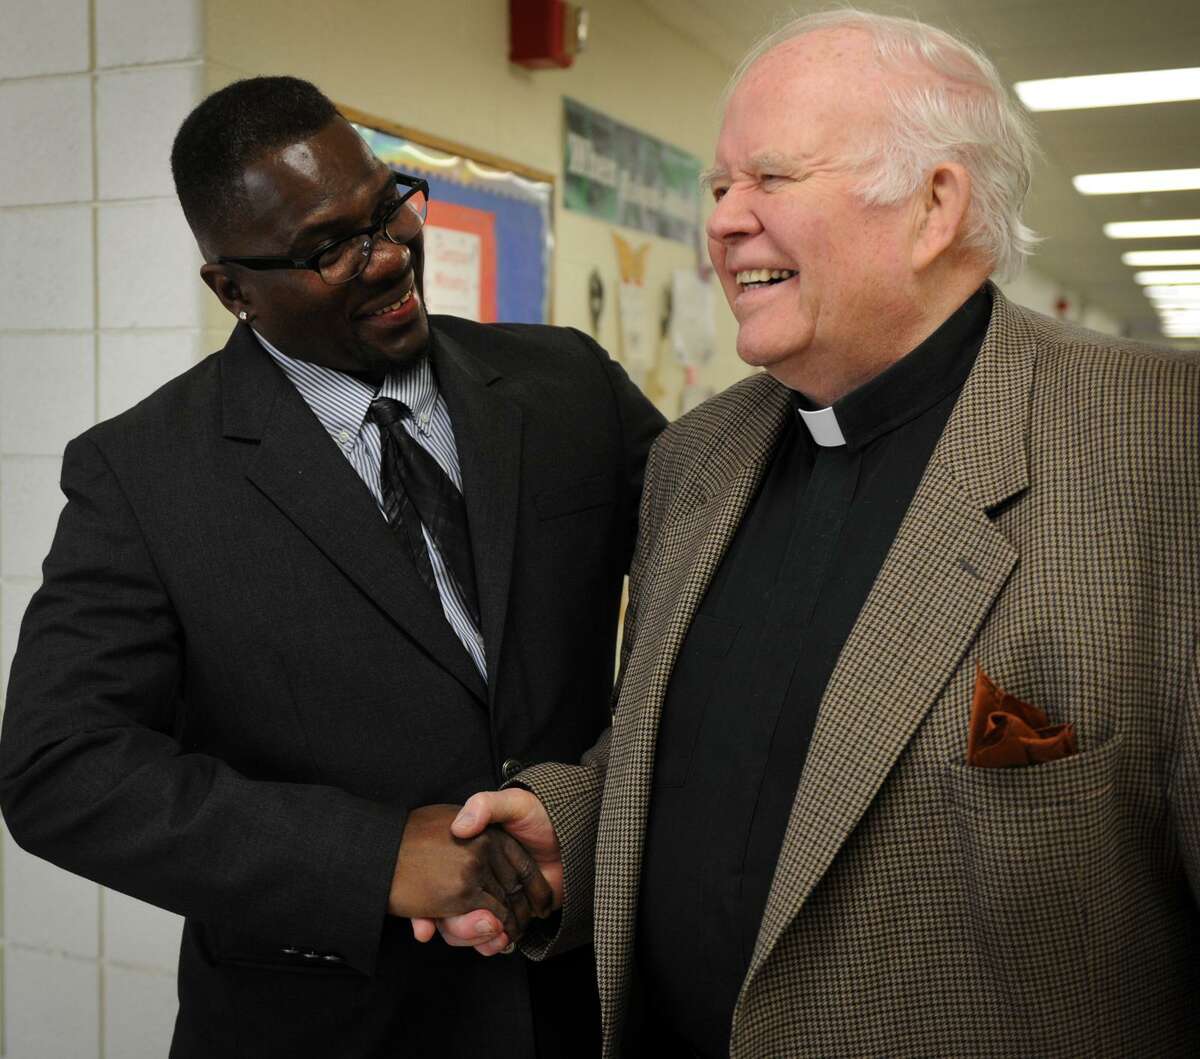 Former Notre Dame of Fairfield basketball and baseball star Tony Barr, left, shakes hands with school president Rev. William Sangiovanni during a visit to his former high school in Fairfield, Conn. on Thursday, May 2, 2013. Barr served over twenty years in prison for drug trafficking.